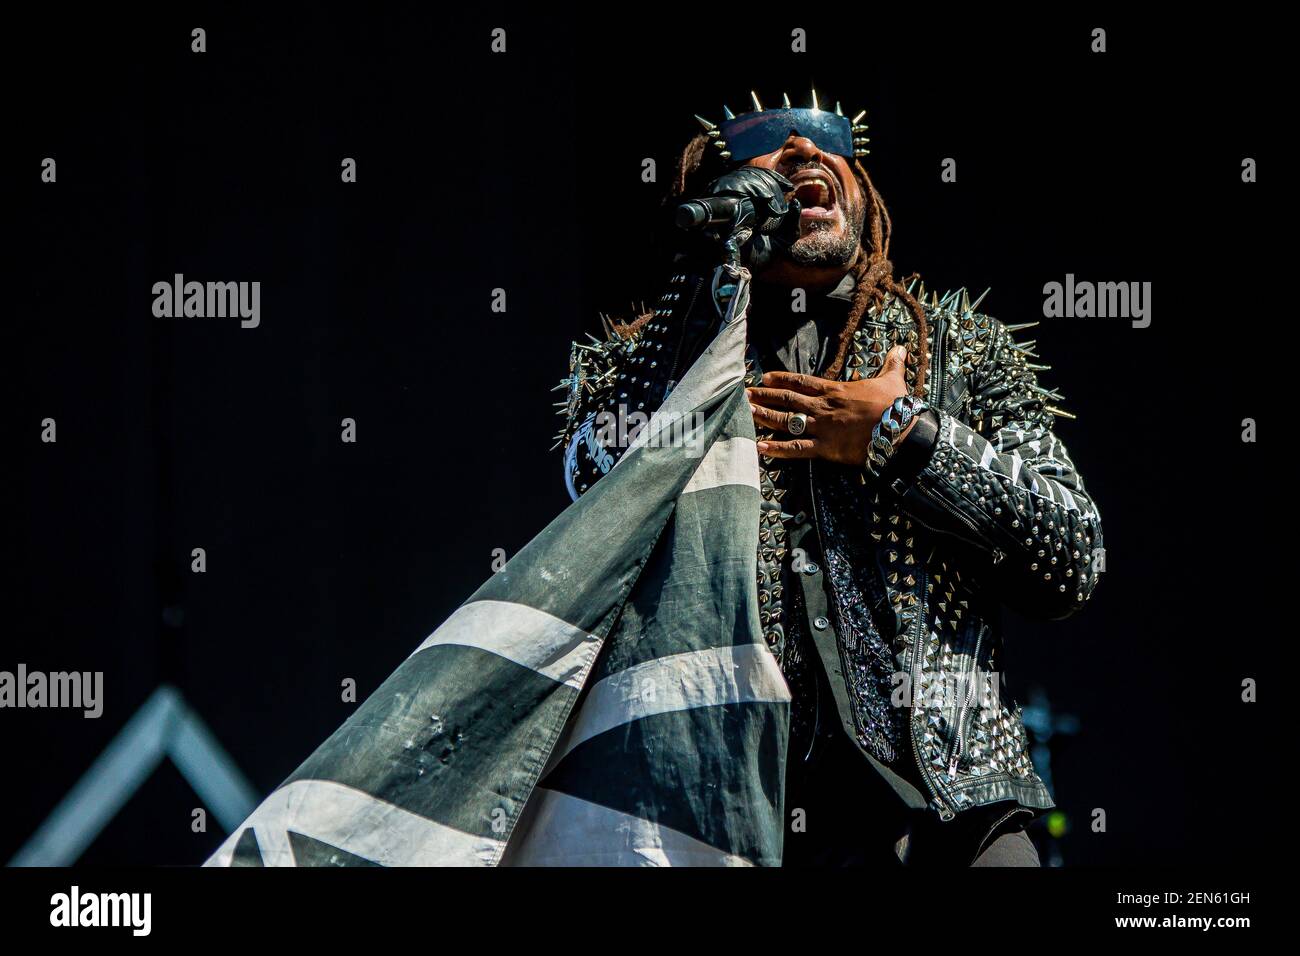 Skindred open the first day of Firenza rocks 2019 in Firenze, Italy on June  13, 2019. Since 1998, Skindred has invaded the stages all over the world  with its unique mix of